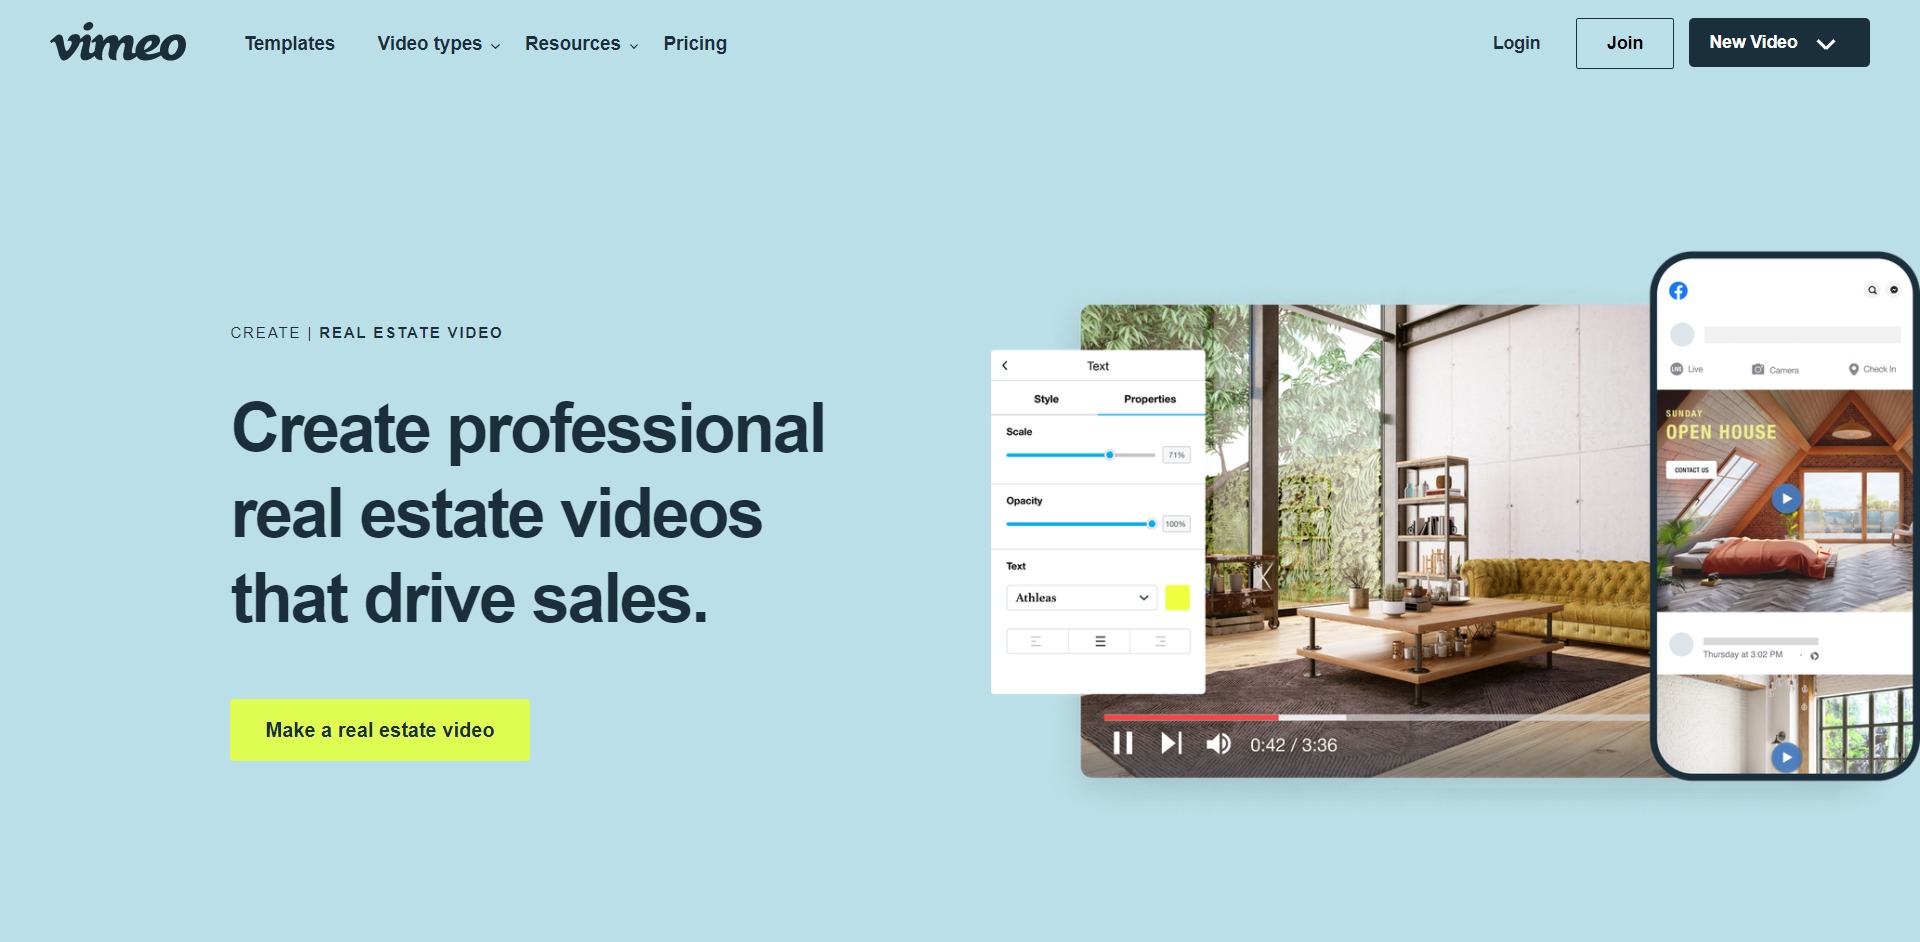 The best Video Marketing Software for Real Estate Investors